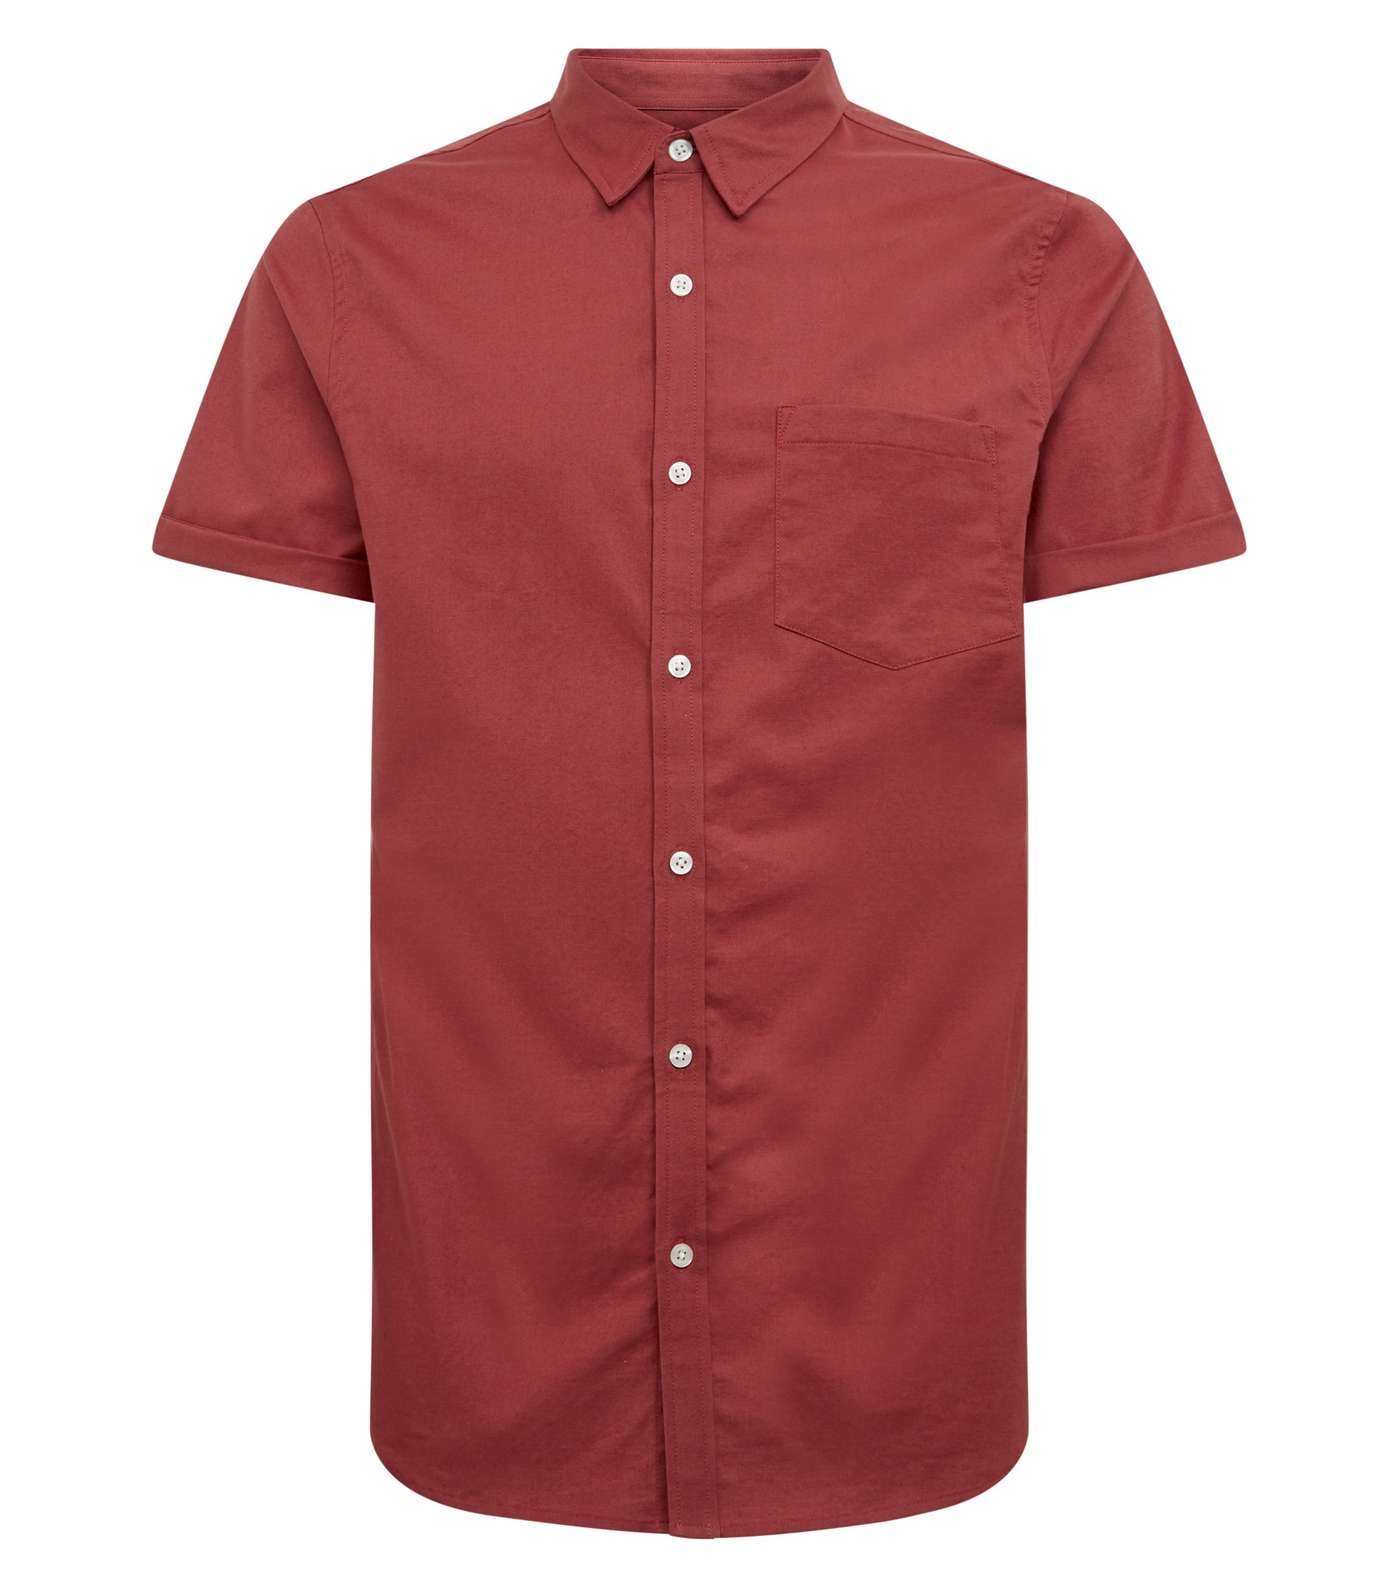 Rust Short Sleeve Muscle Fit Oxford Shirt Image 4